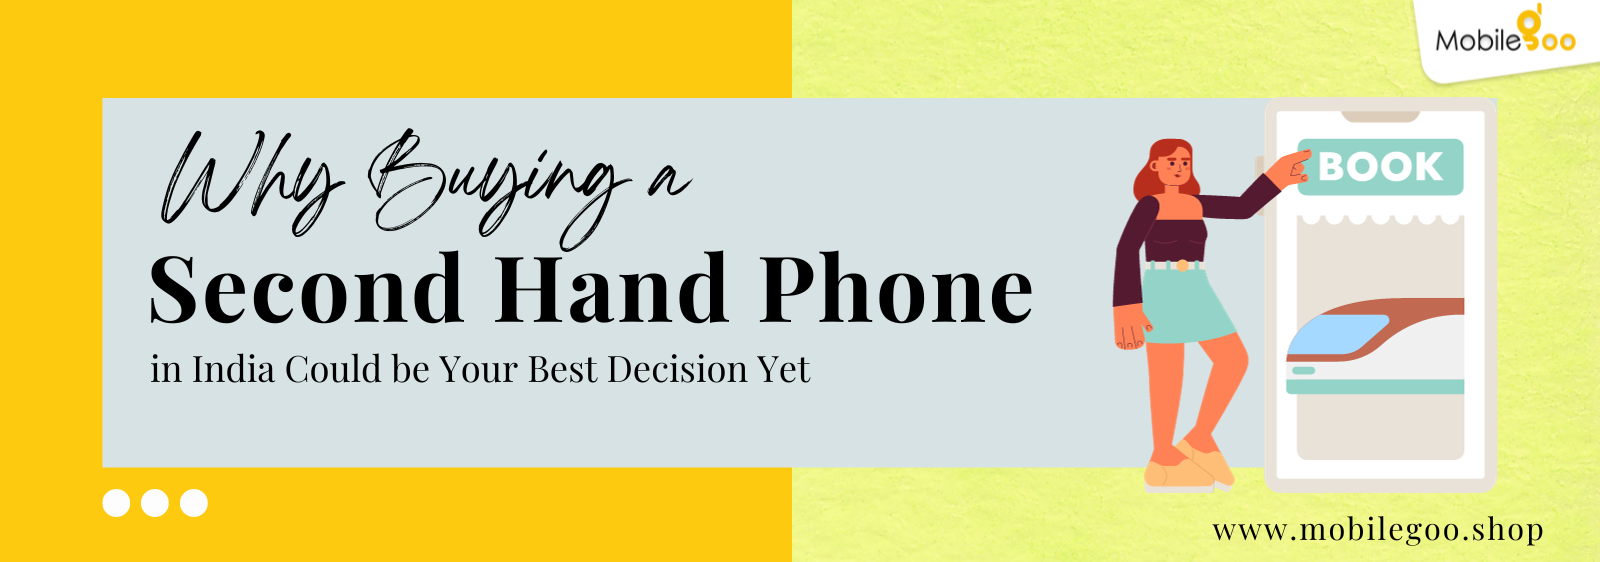 Why Buying a Second Hand Phone in India Could be Your Best Decision Yet?